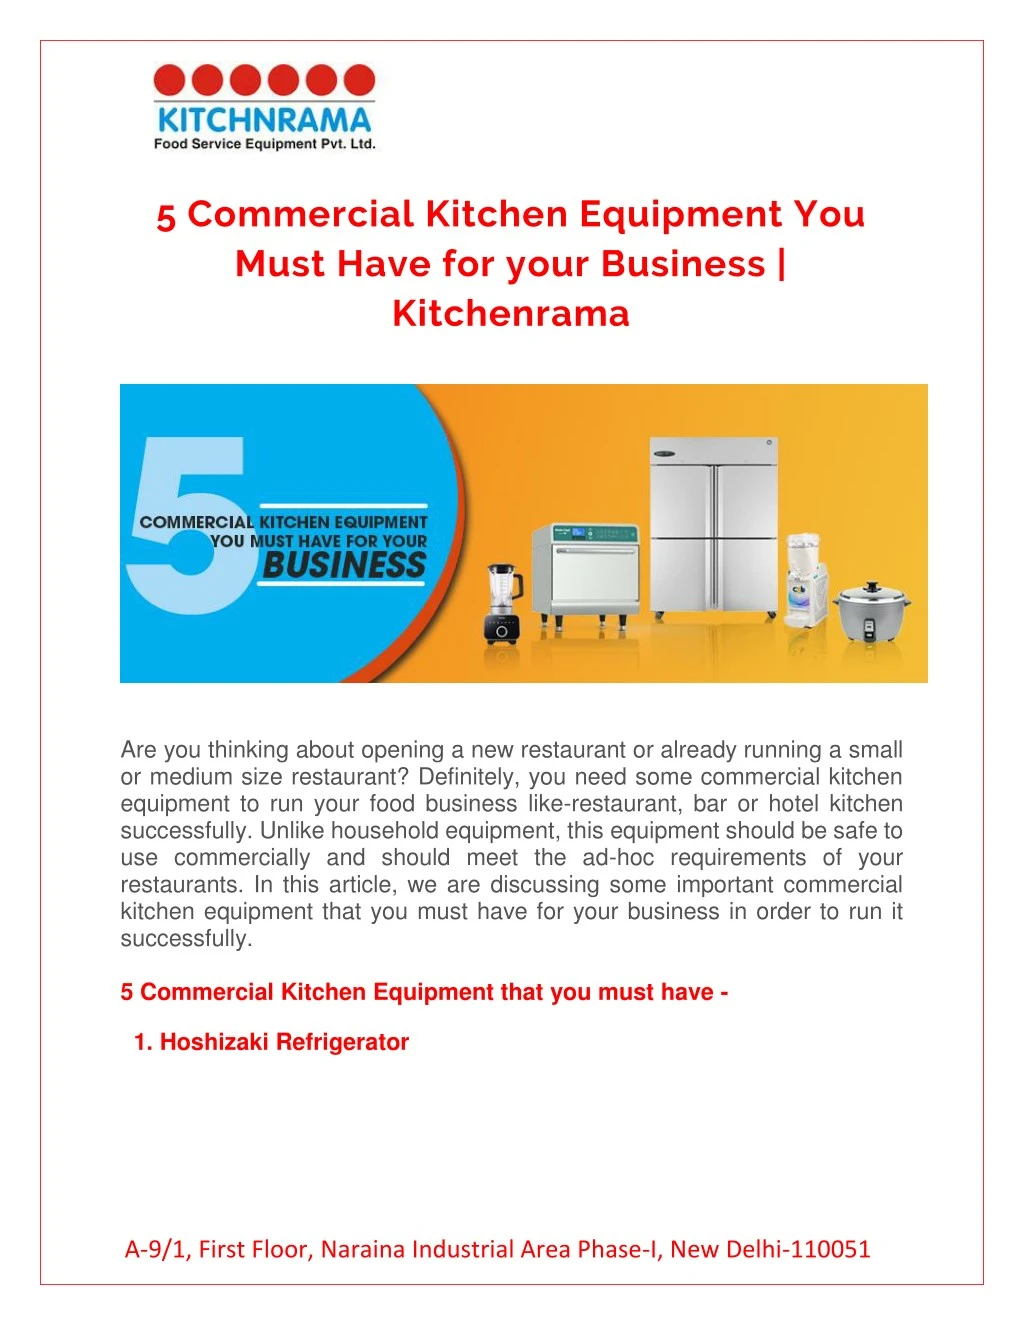 5 commercial kitchen equipment you must have